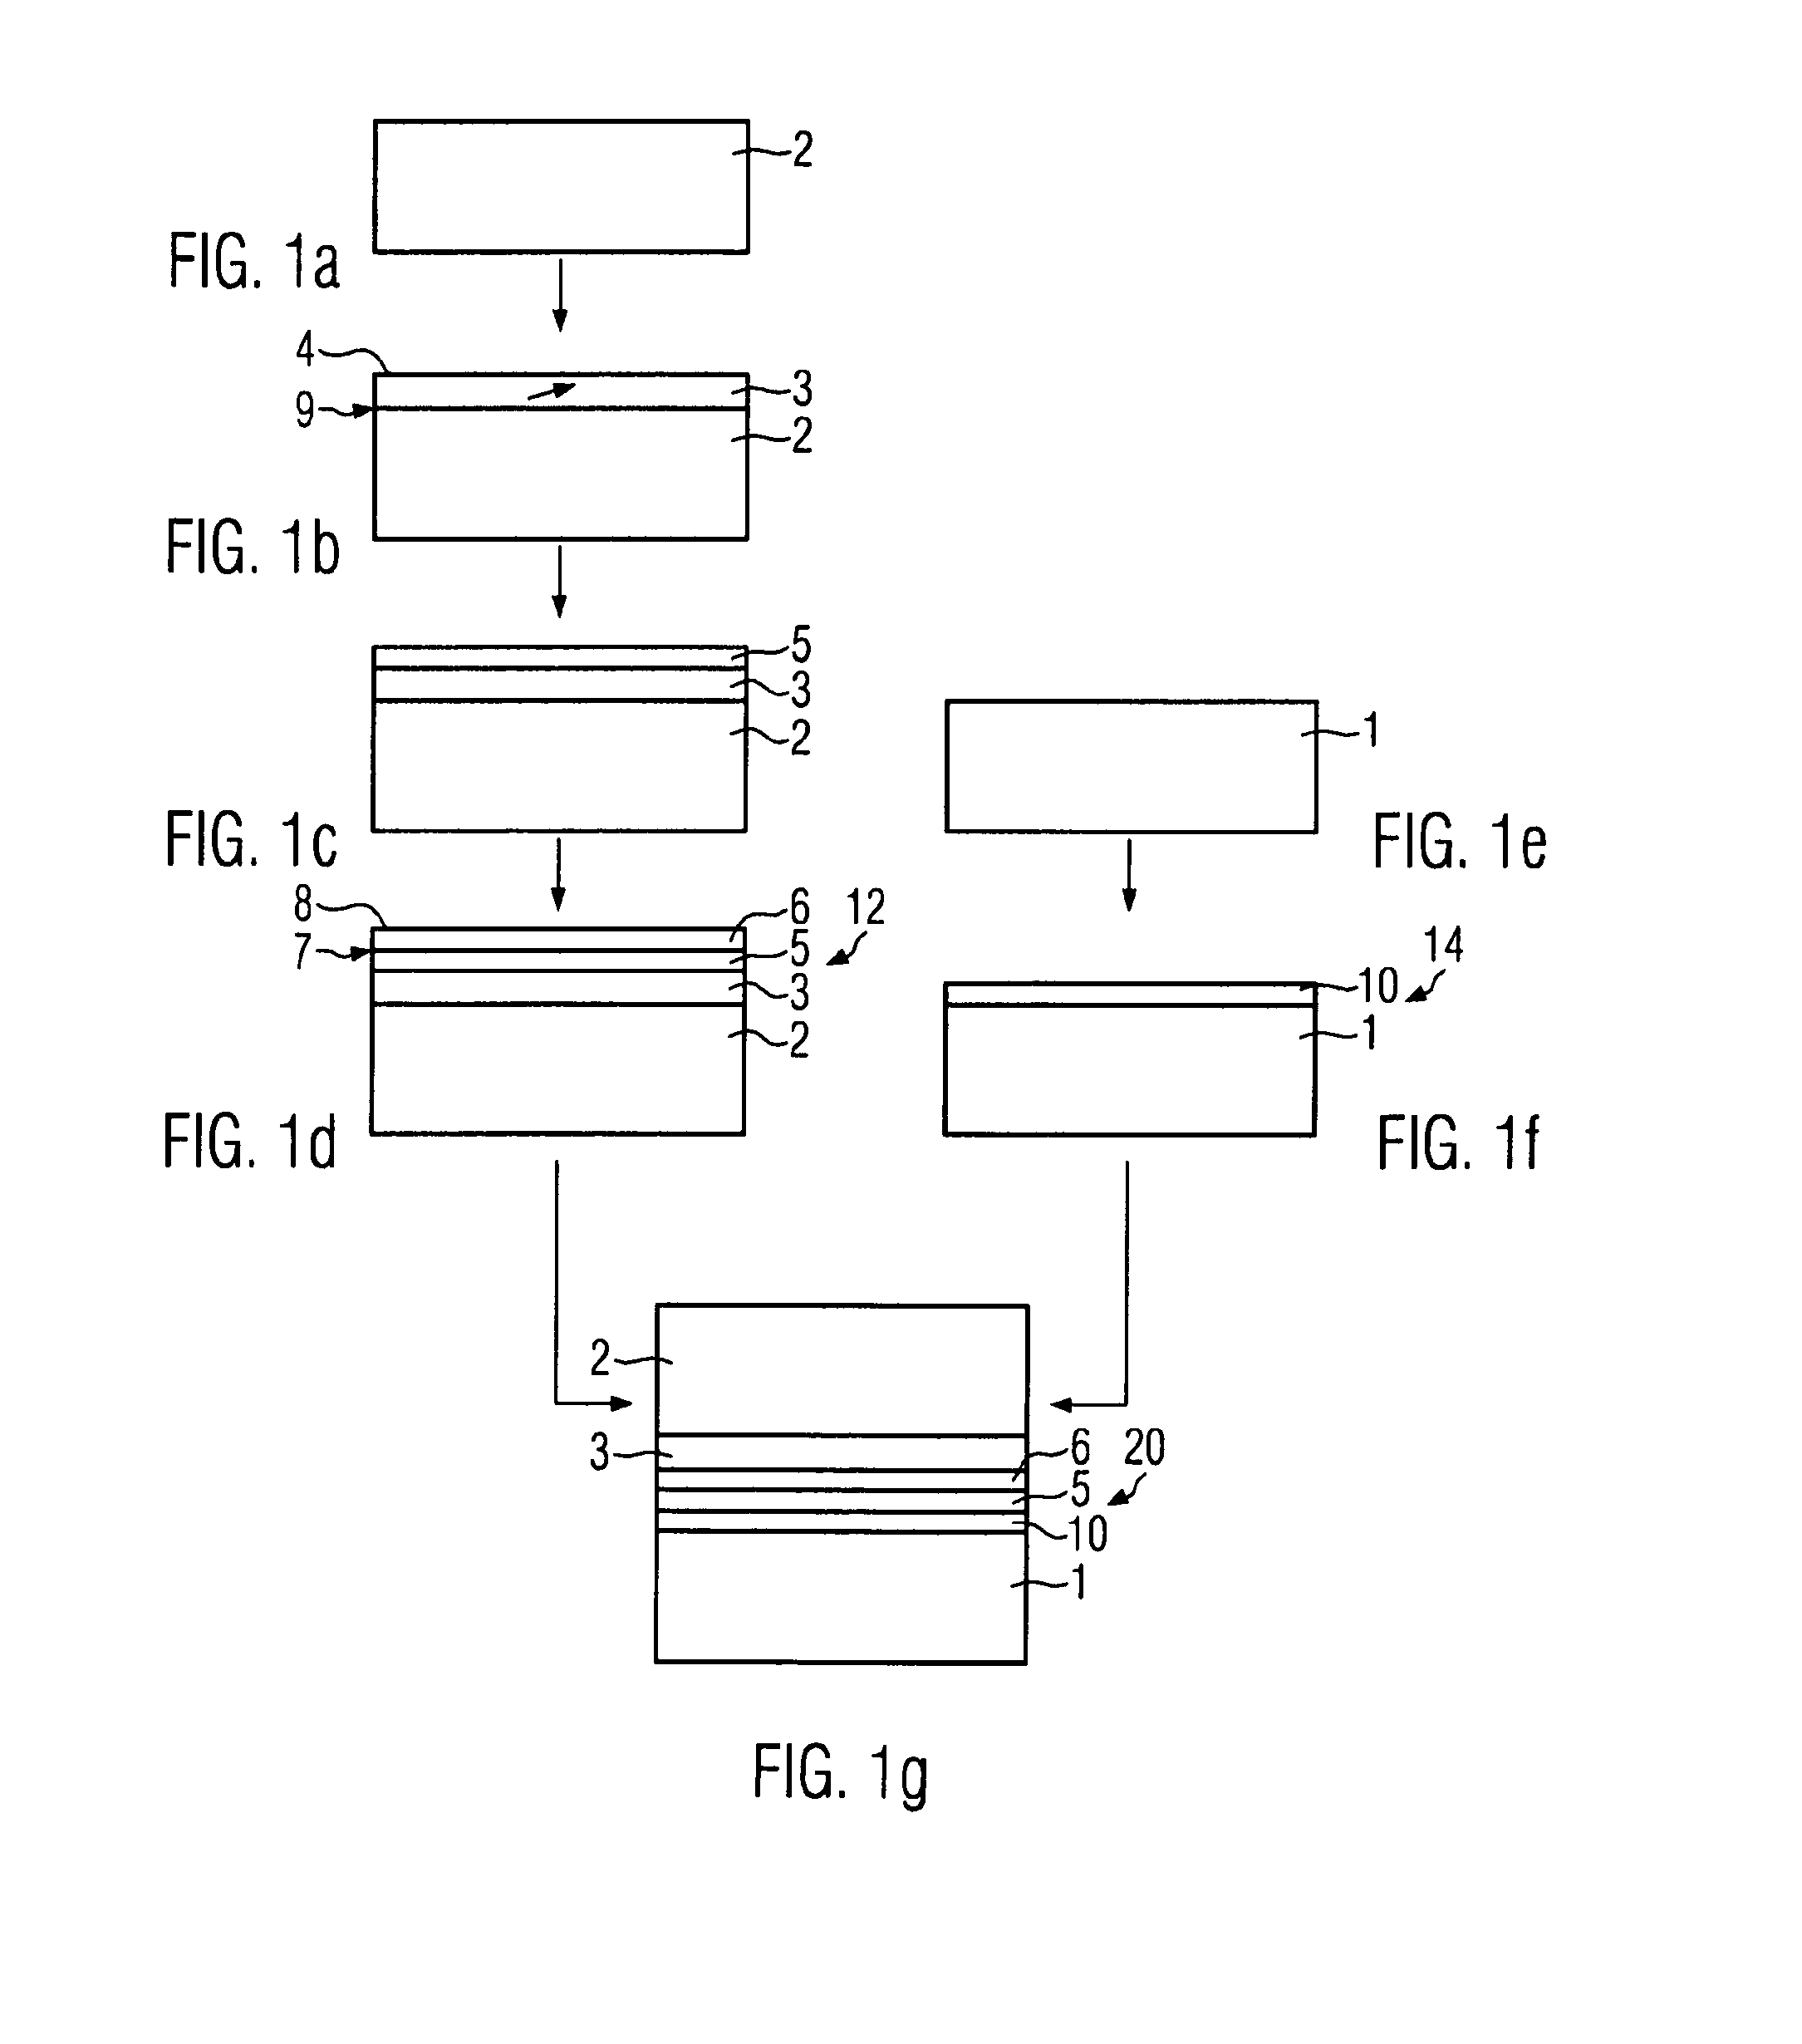 Method of manufacturing a semiconductor heterostructure